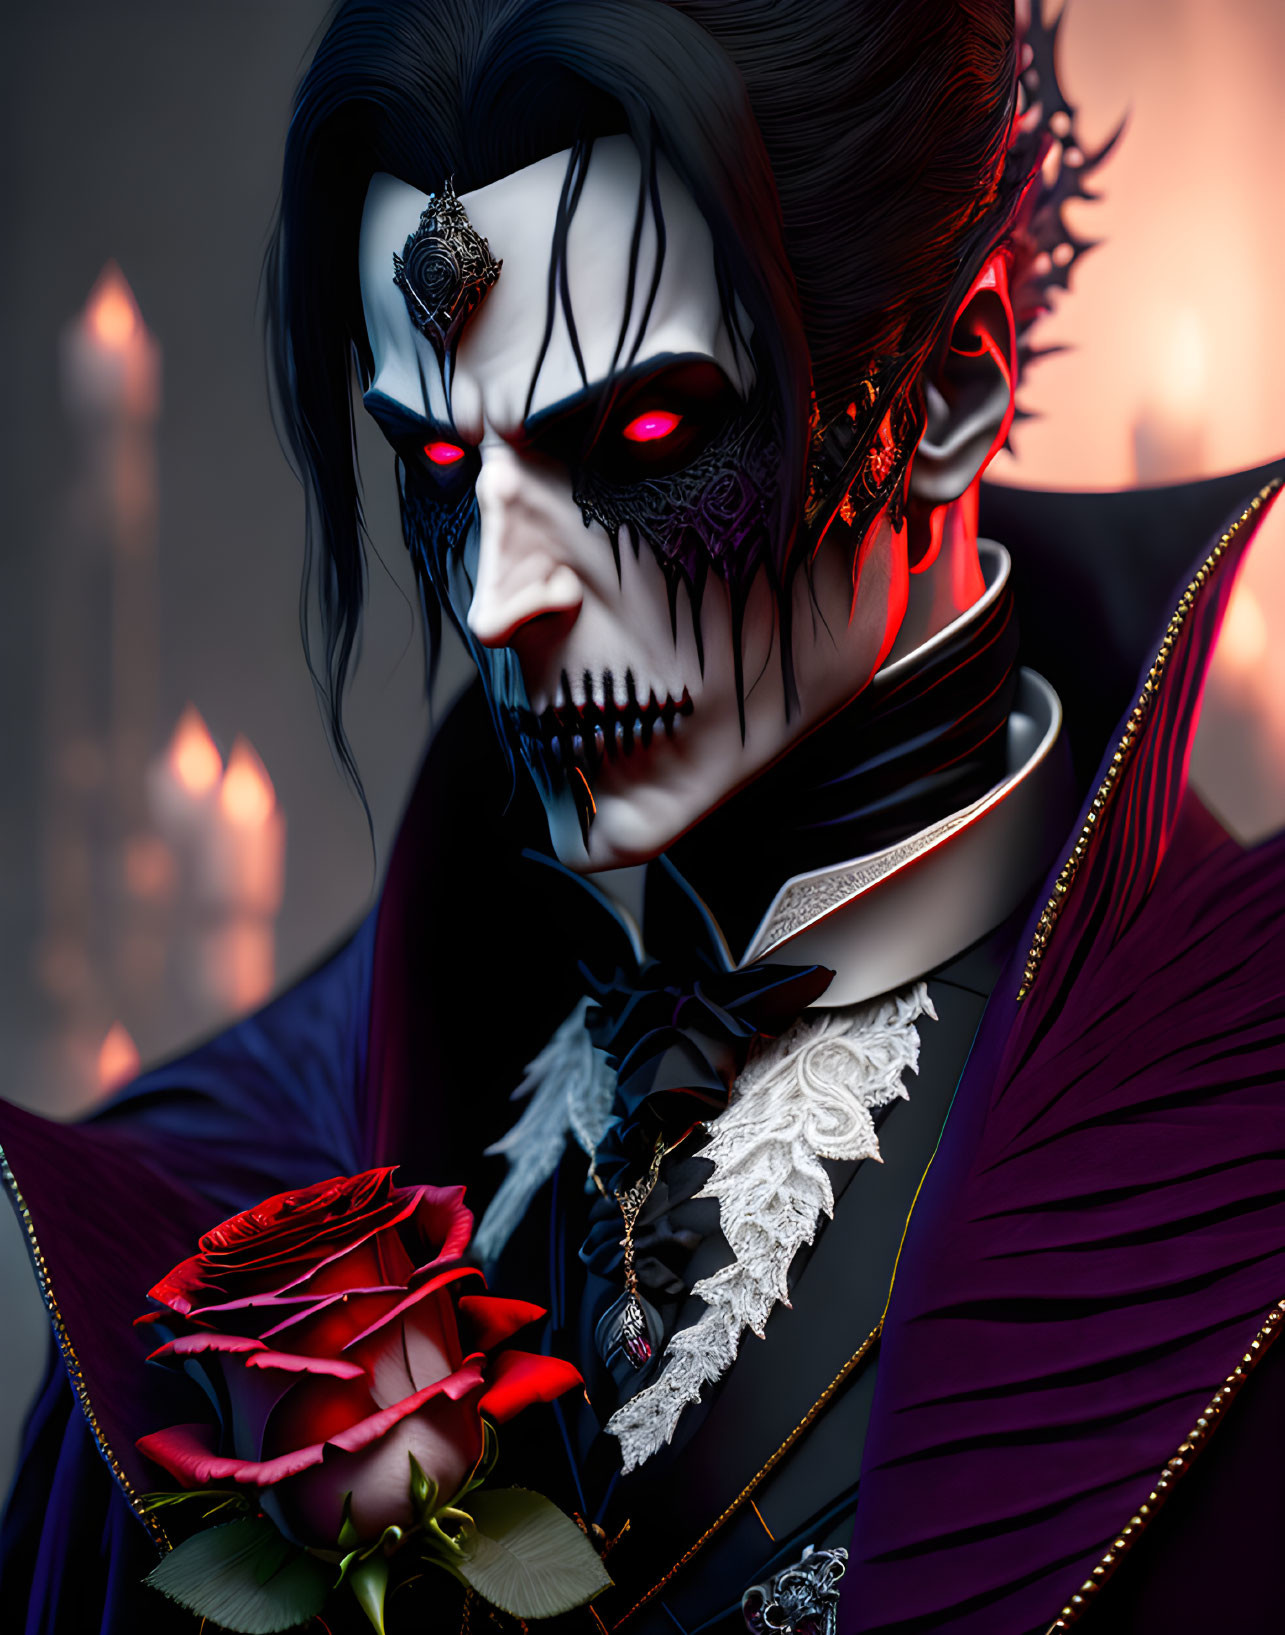 Gothic vampire with red eyes, fangs, holding a red rose in dark suit